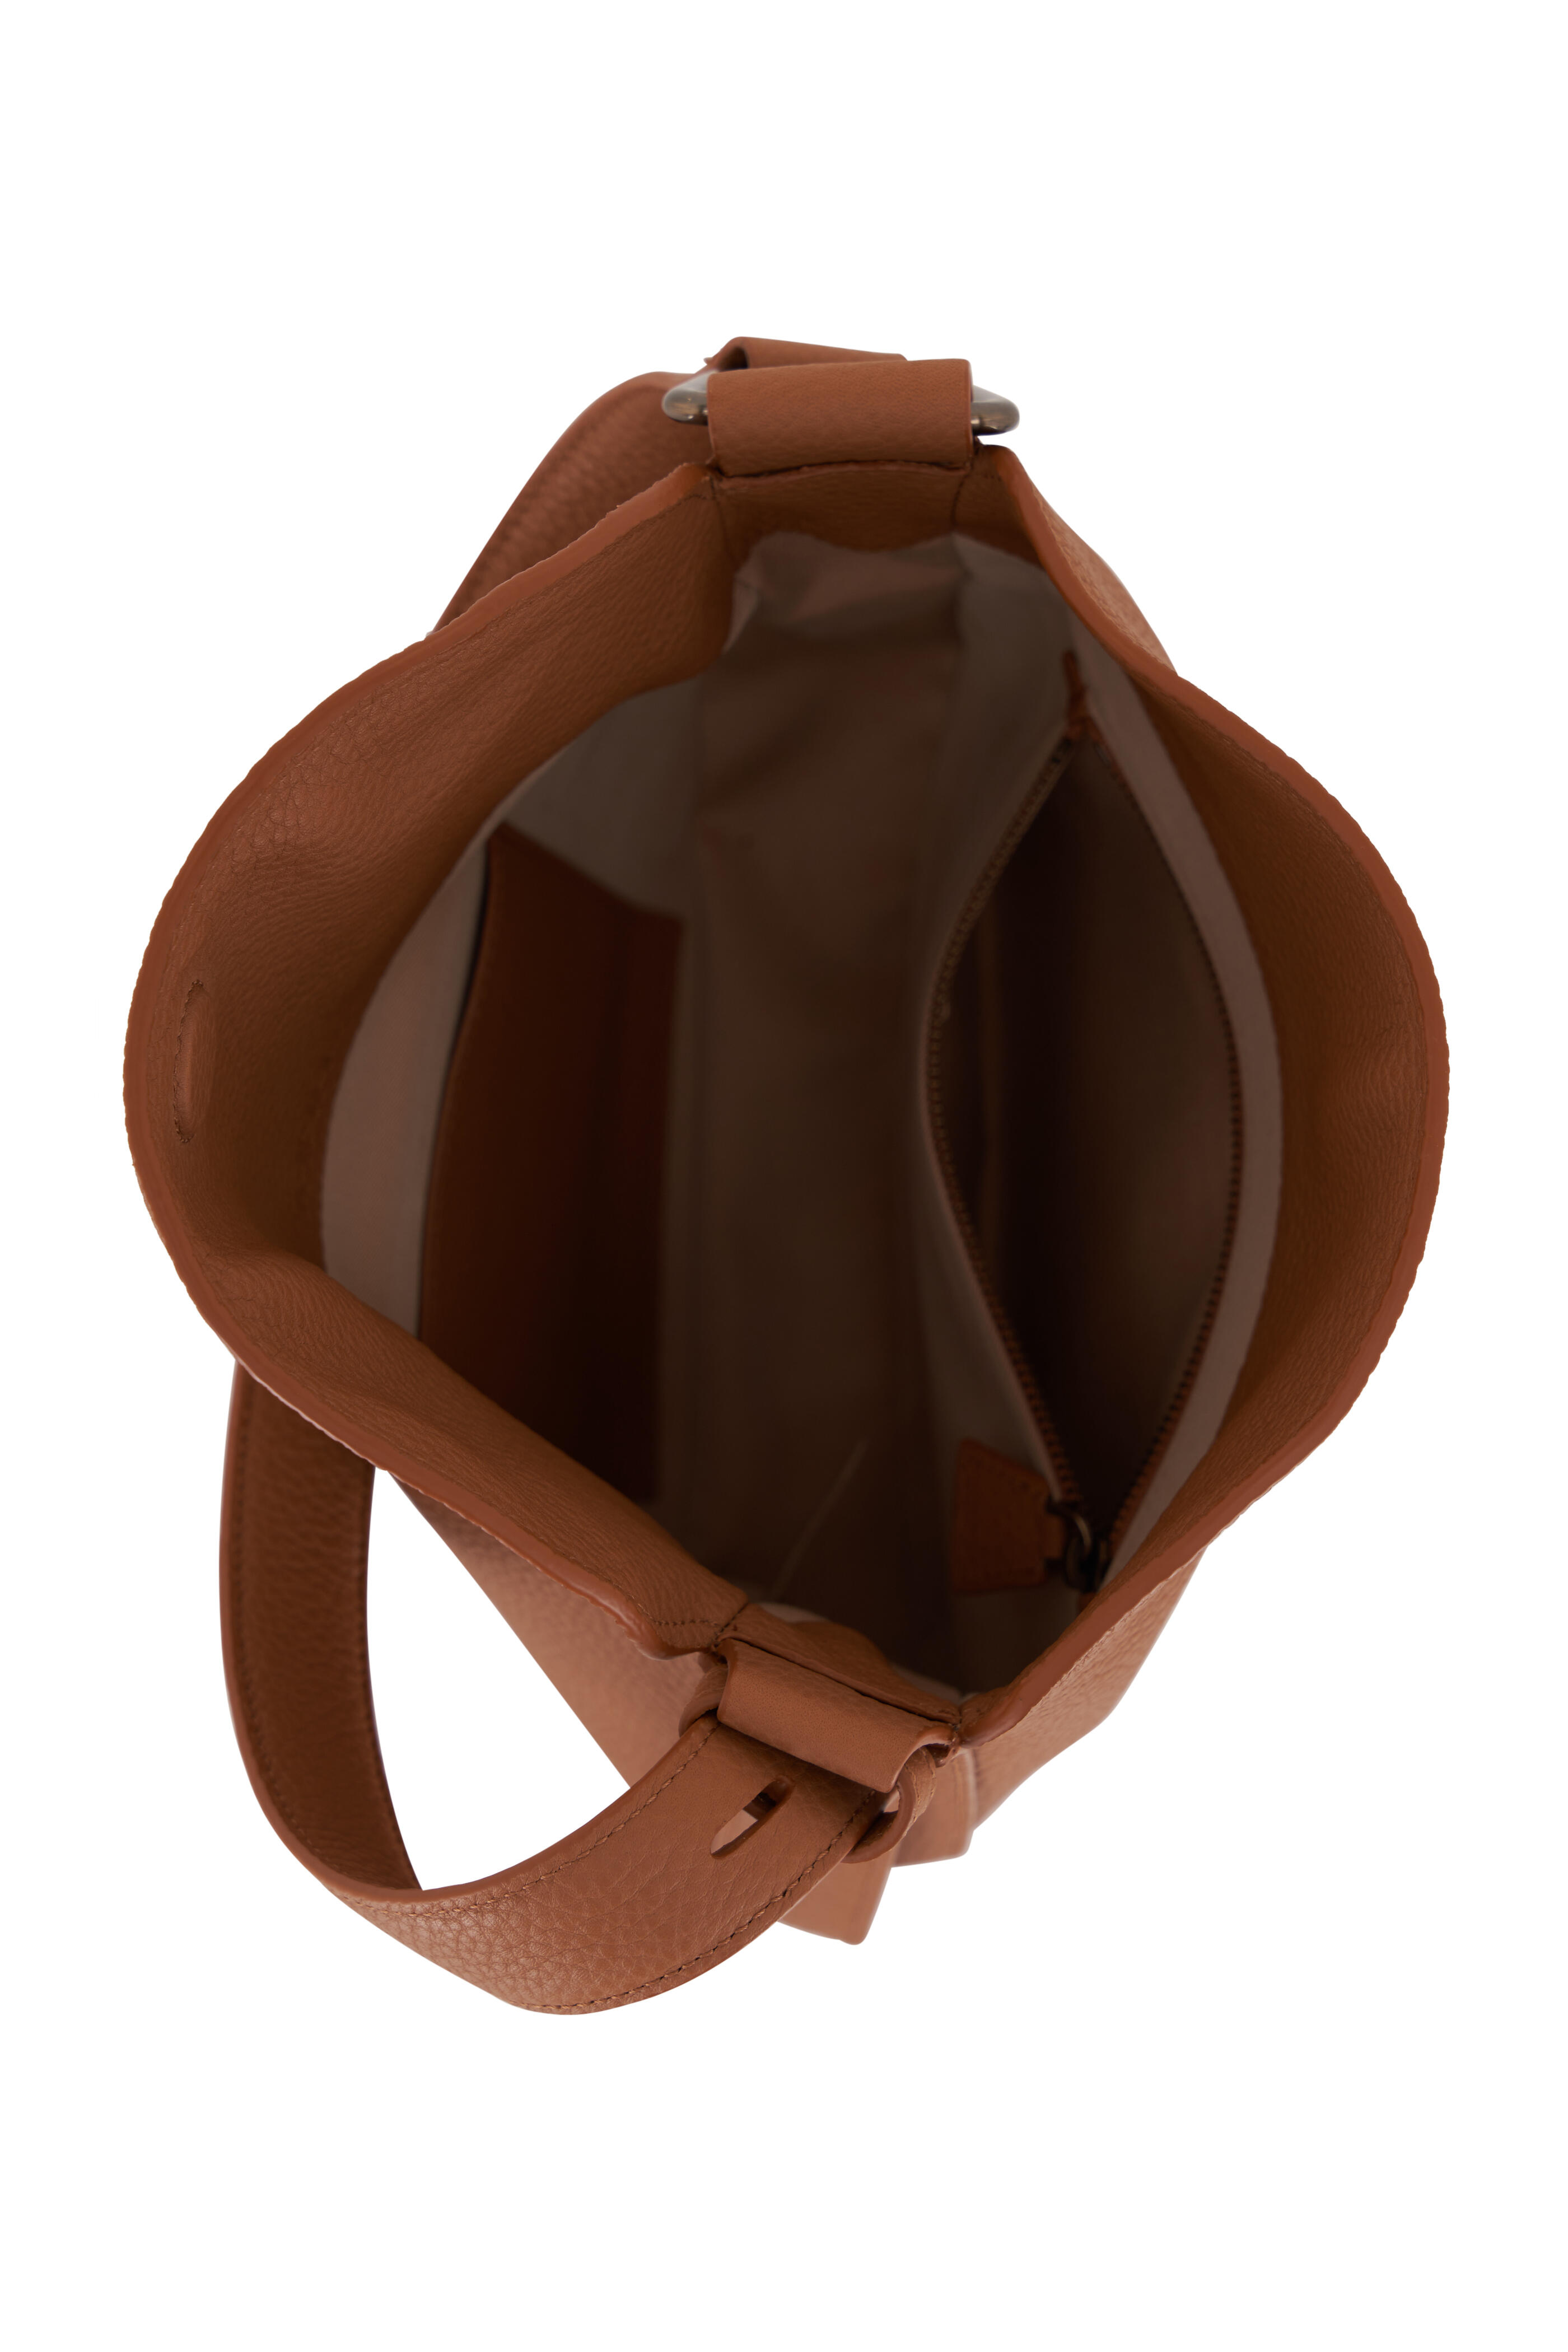 Little Anna Hobo Bag in Leather